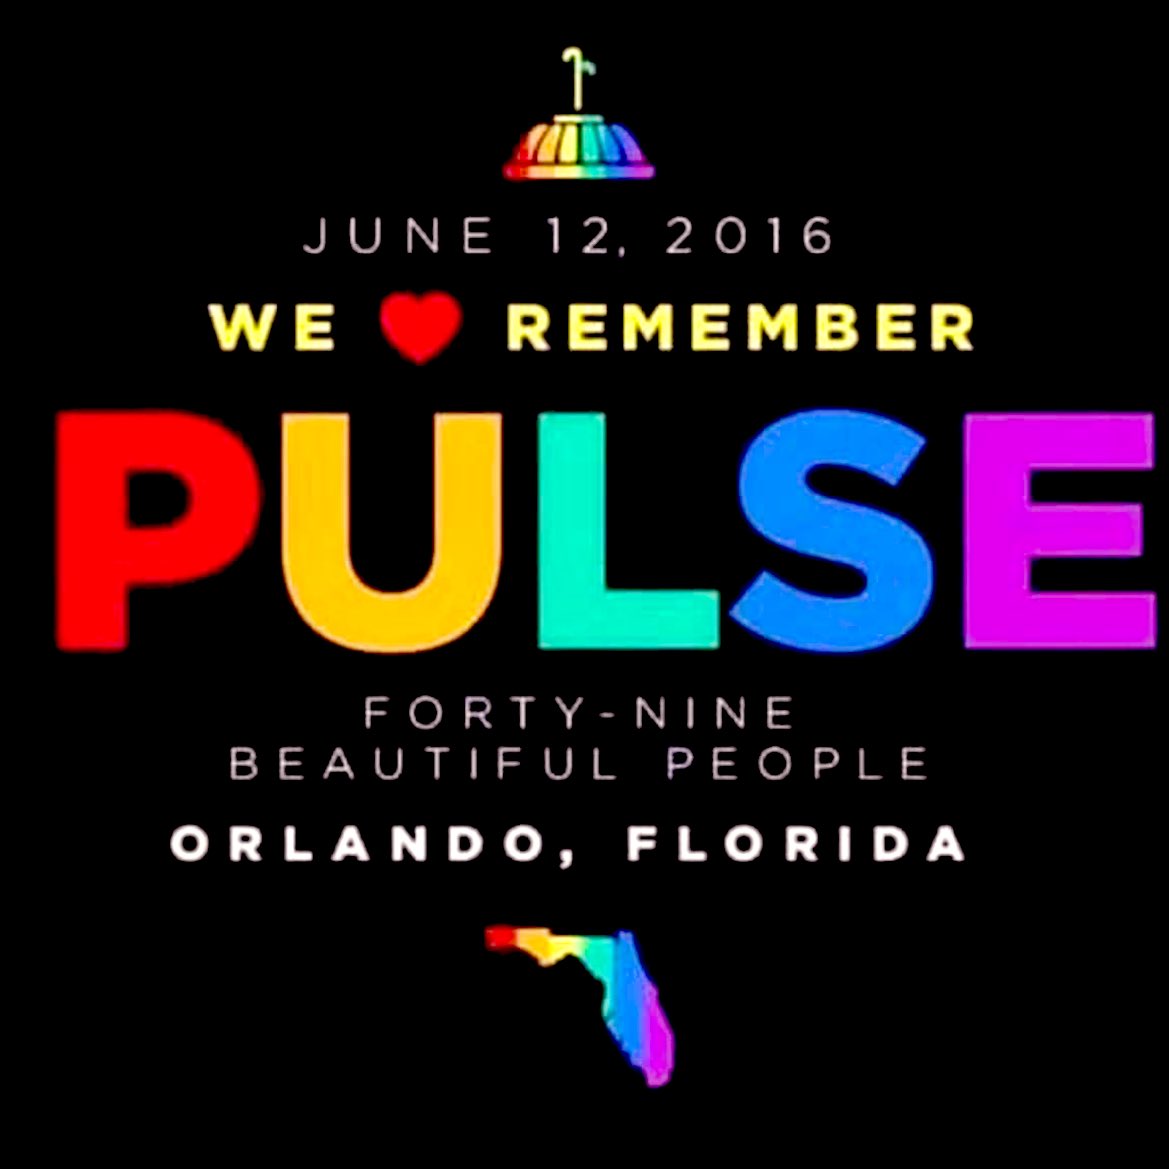 TODAY: Marks 7 years since 49 men & women were murdered at Pulse Nightclub due to bigotry, prejudice & hatred.

Today we celebrate & honor them. I stand with the family, friends & supporters that are still grieving. #PulseNightClub #LGBTQ